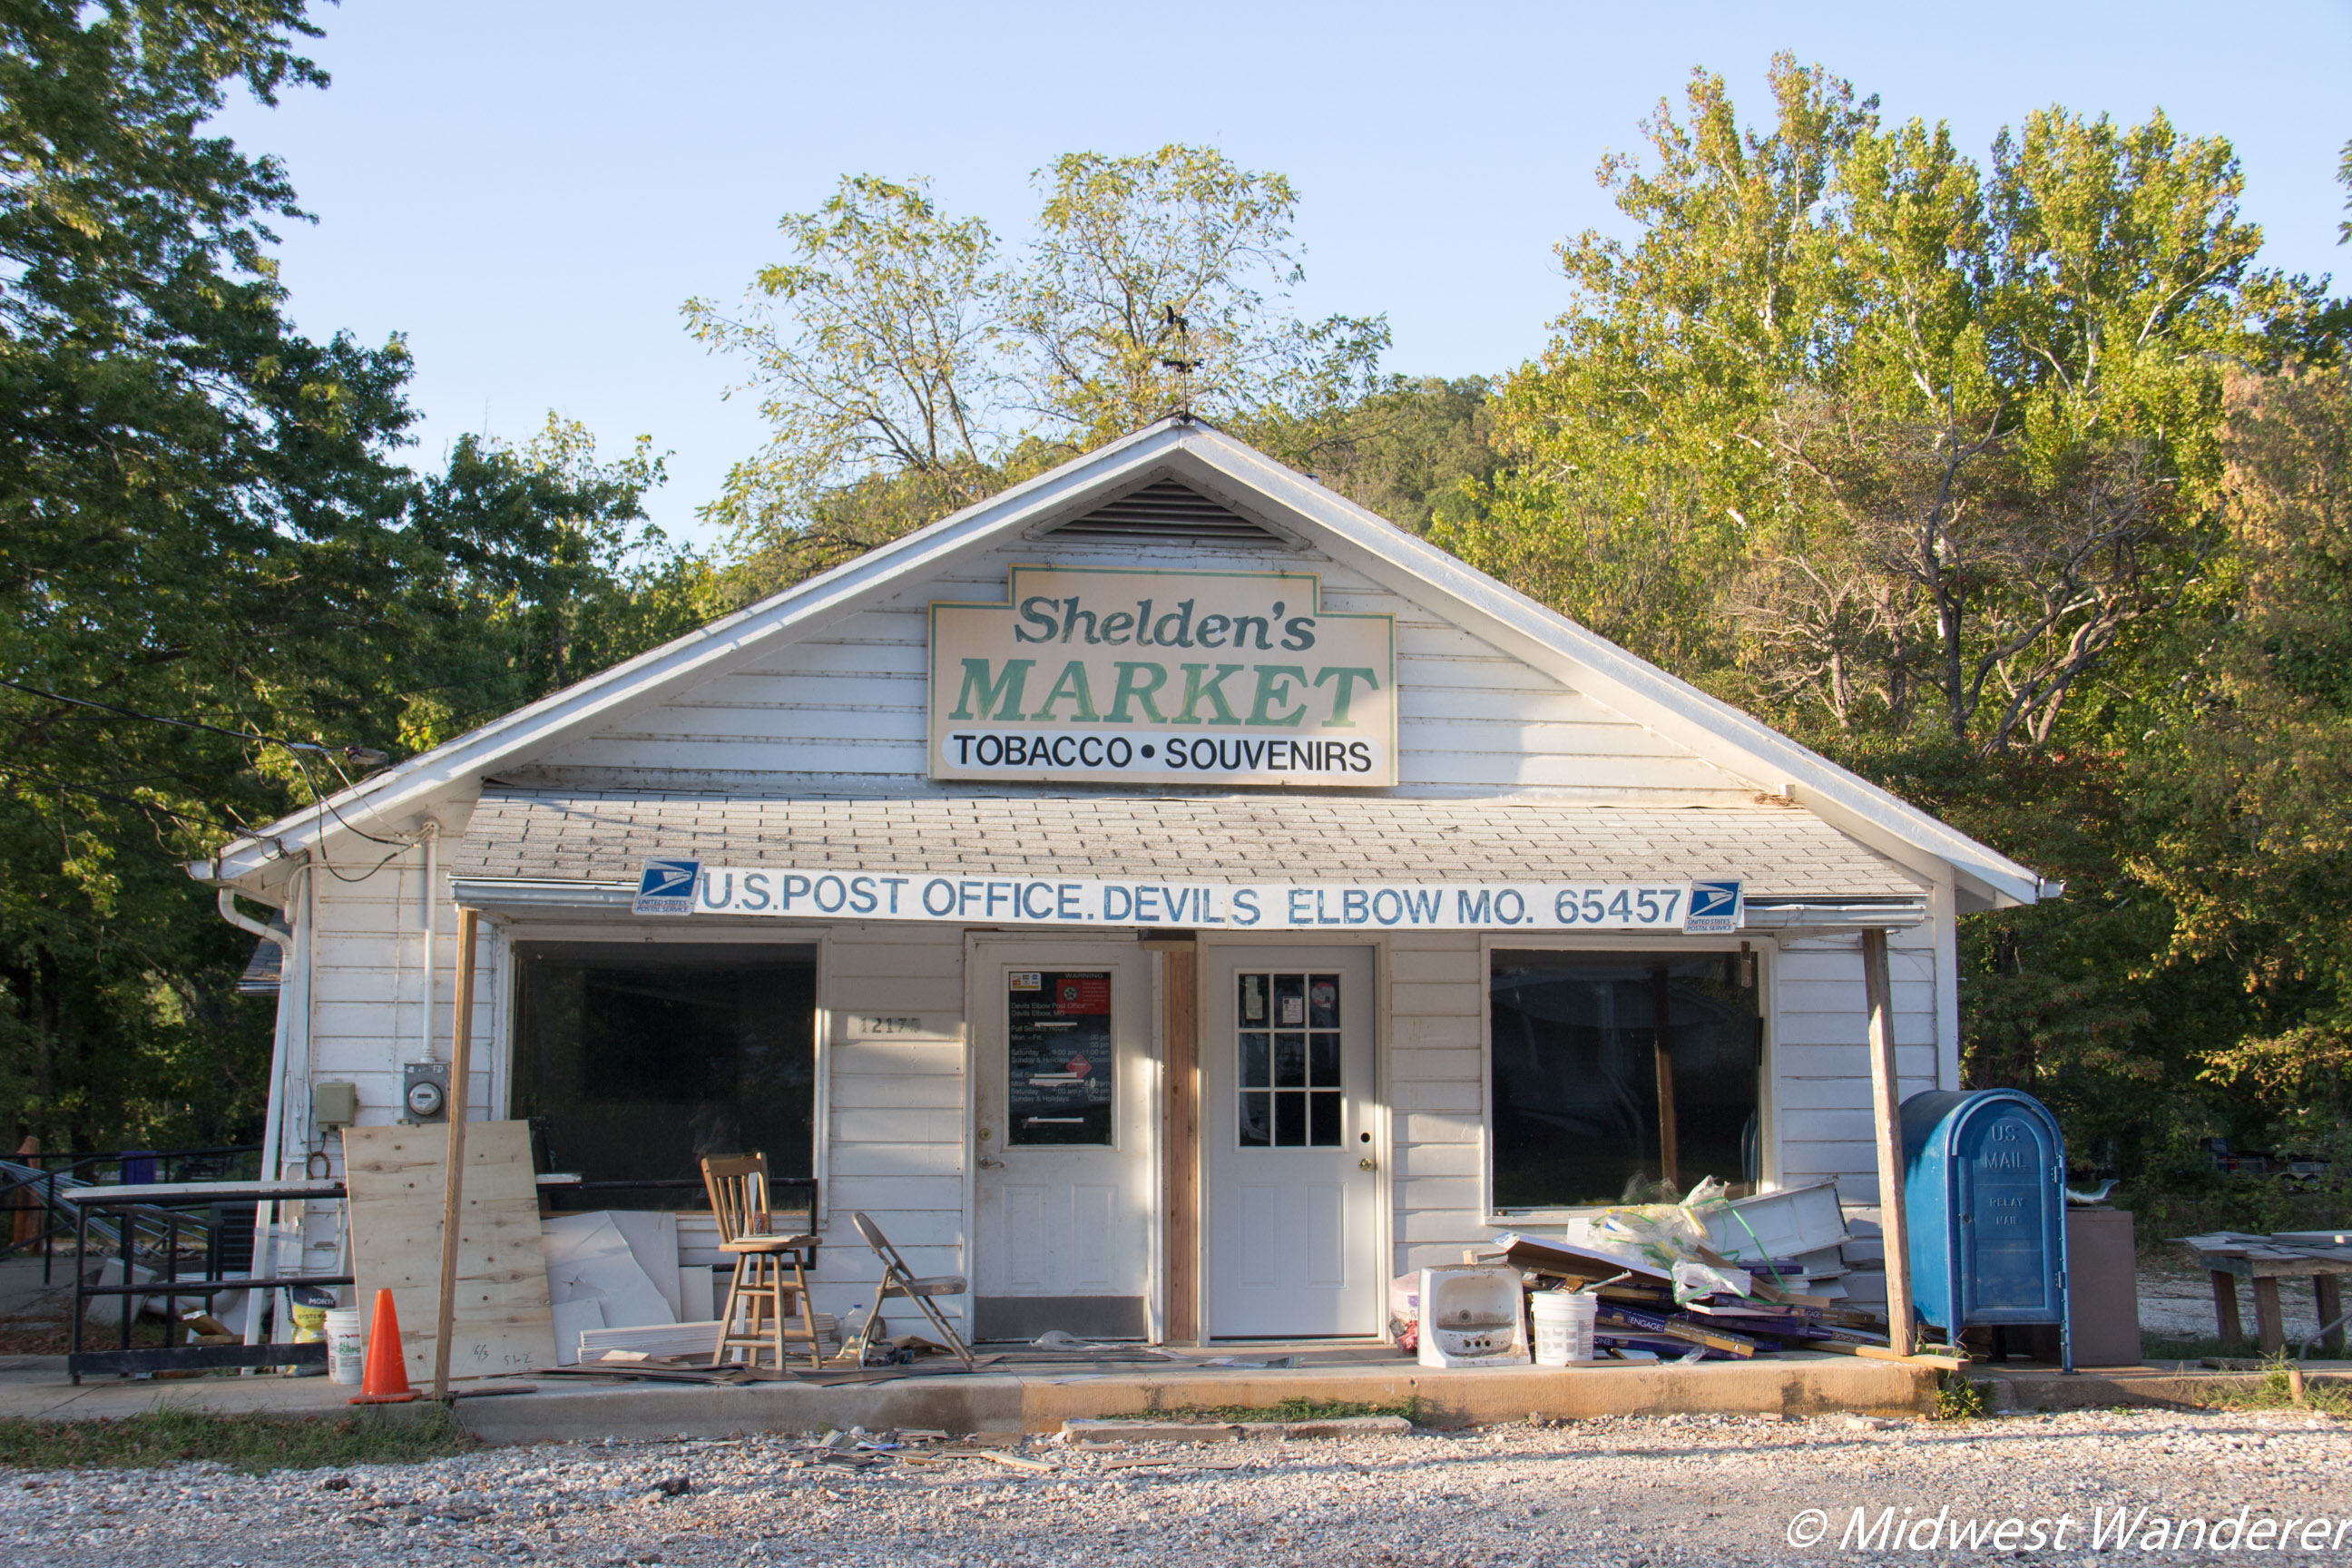 Route 66 through Pulaski County - Shelden's Market and Post Office in Devil's Elbow